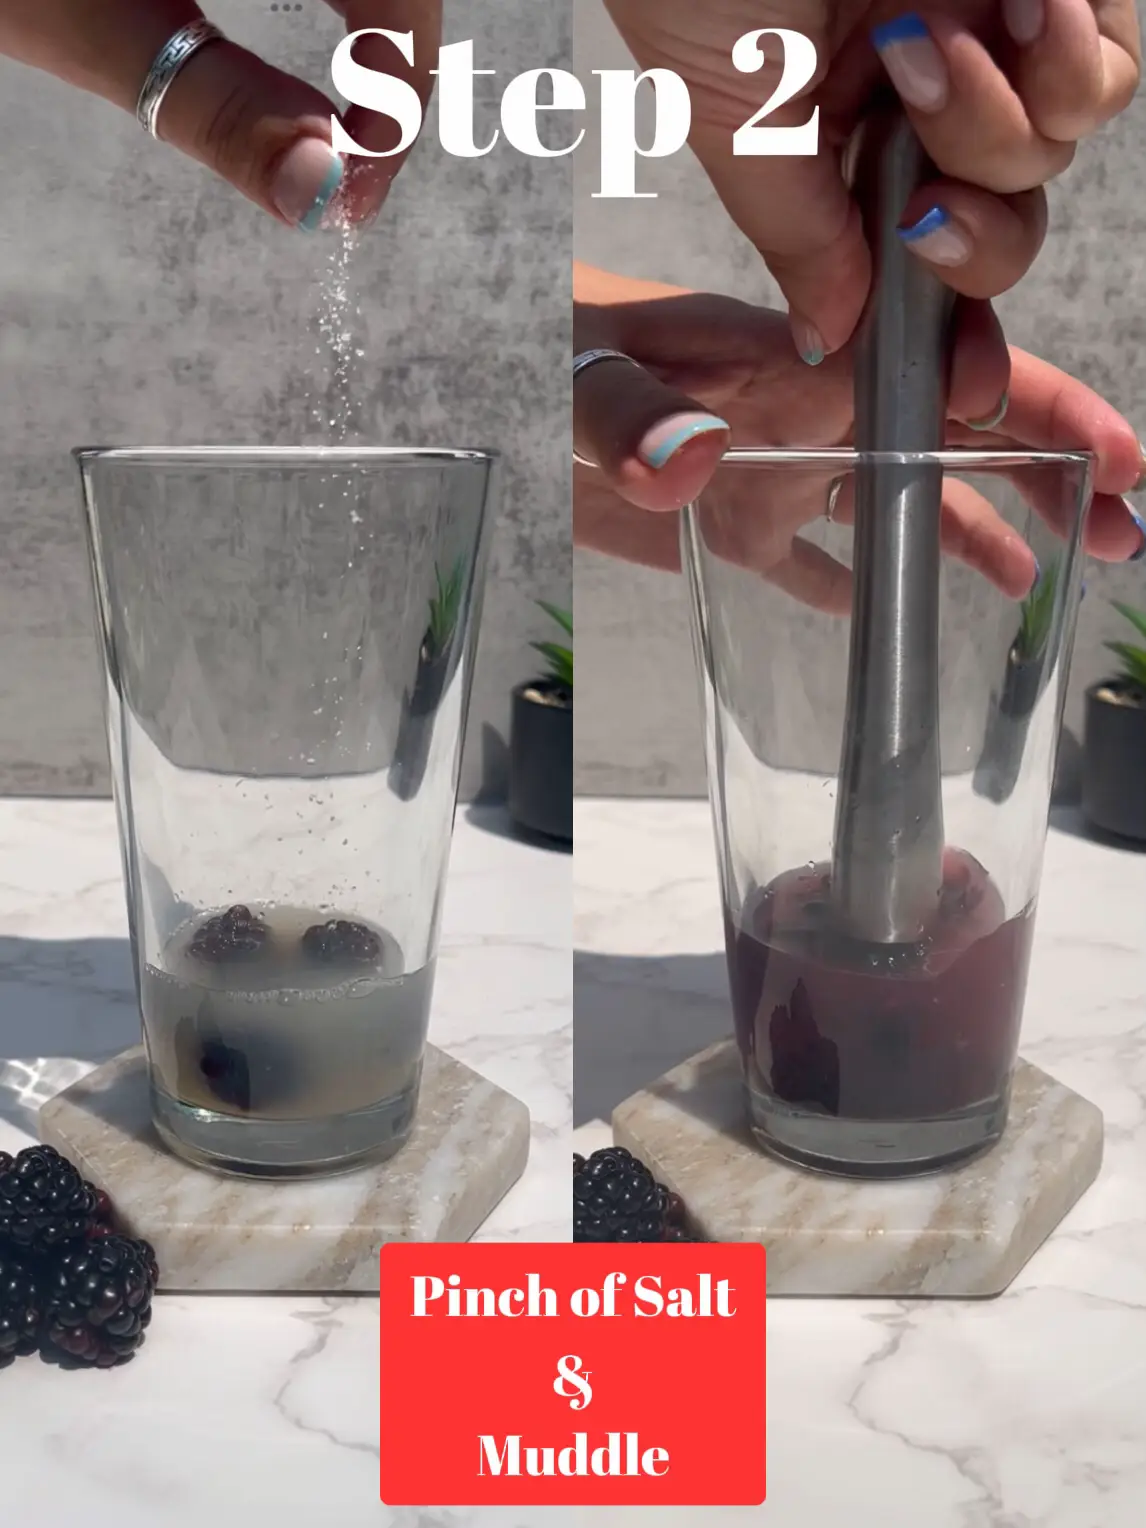  A person is holding a salt shaker and adding salt to a glass of juice.